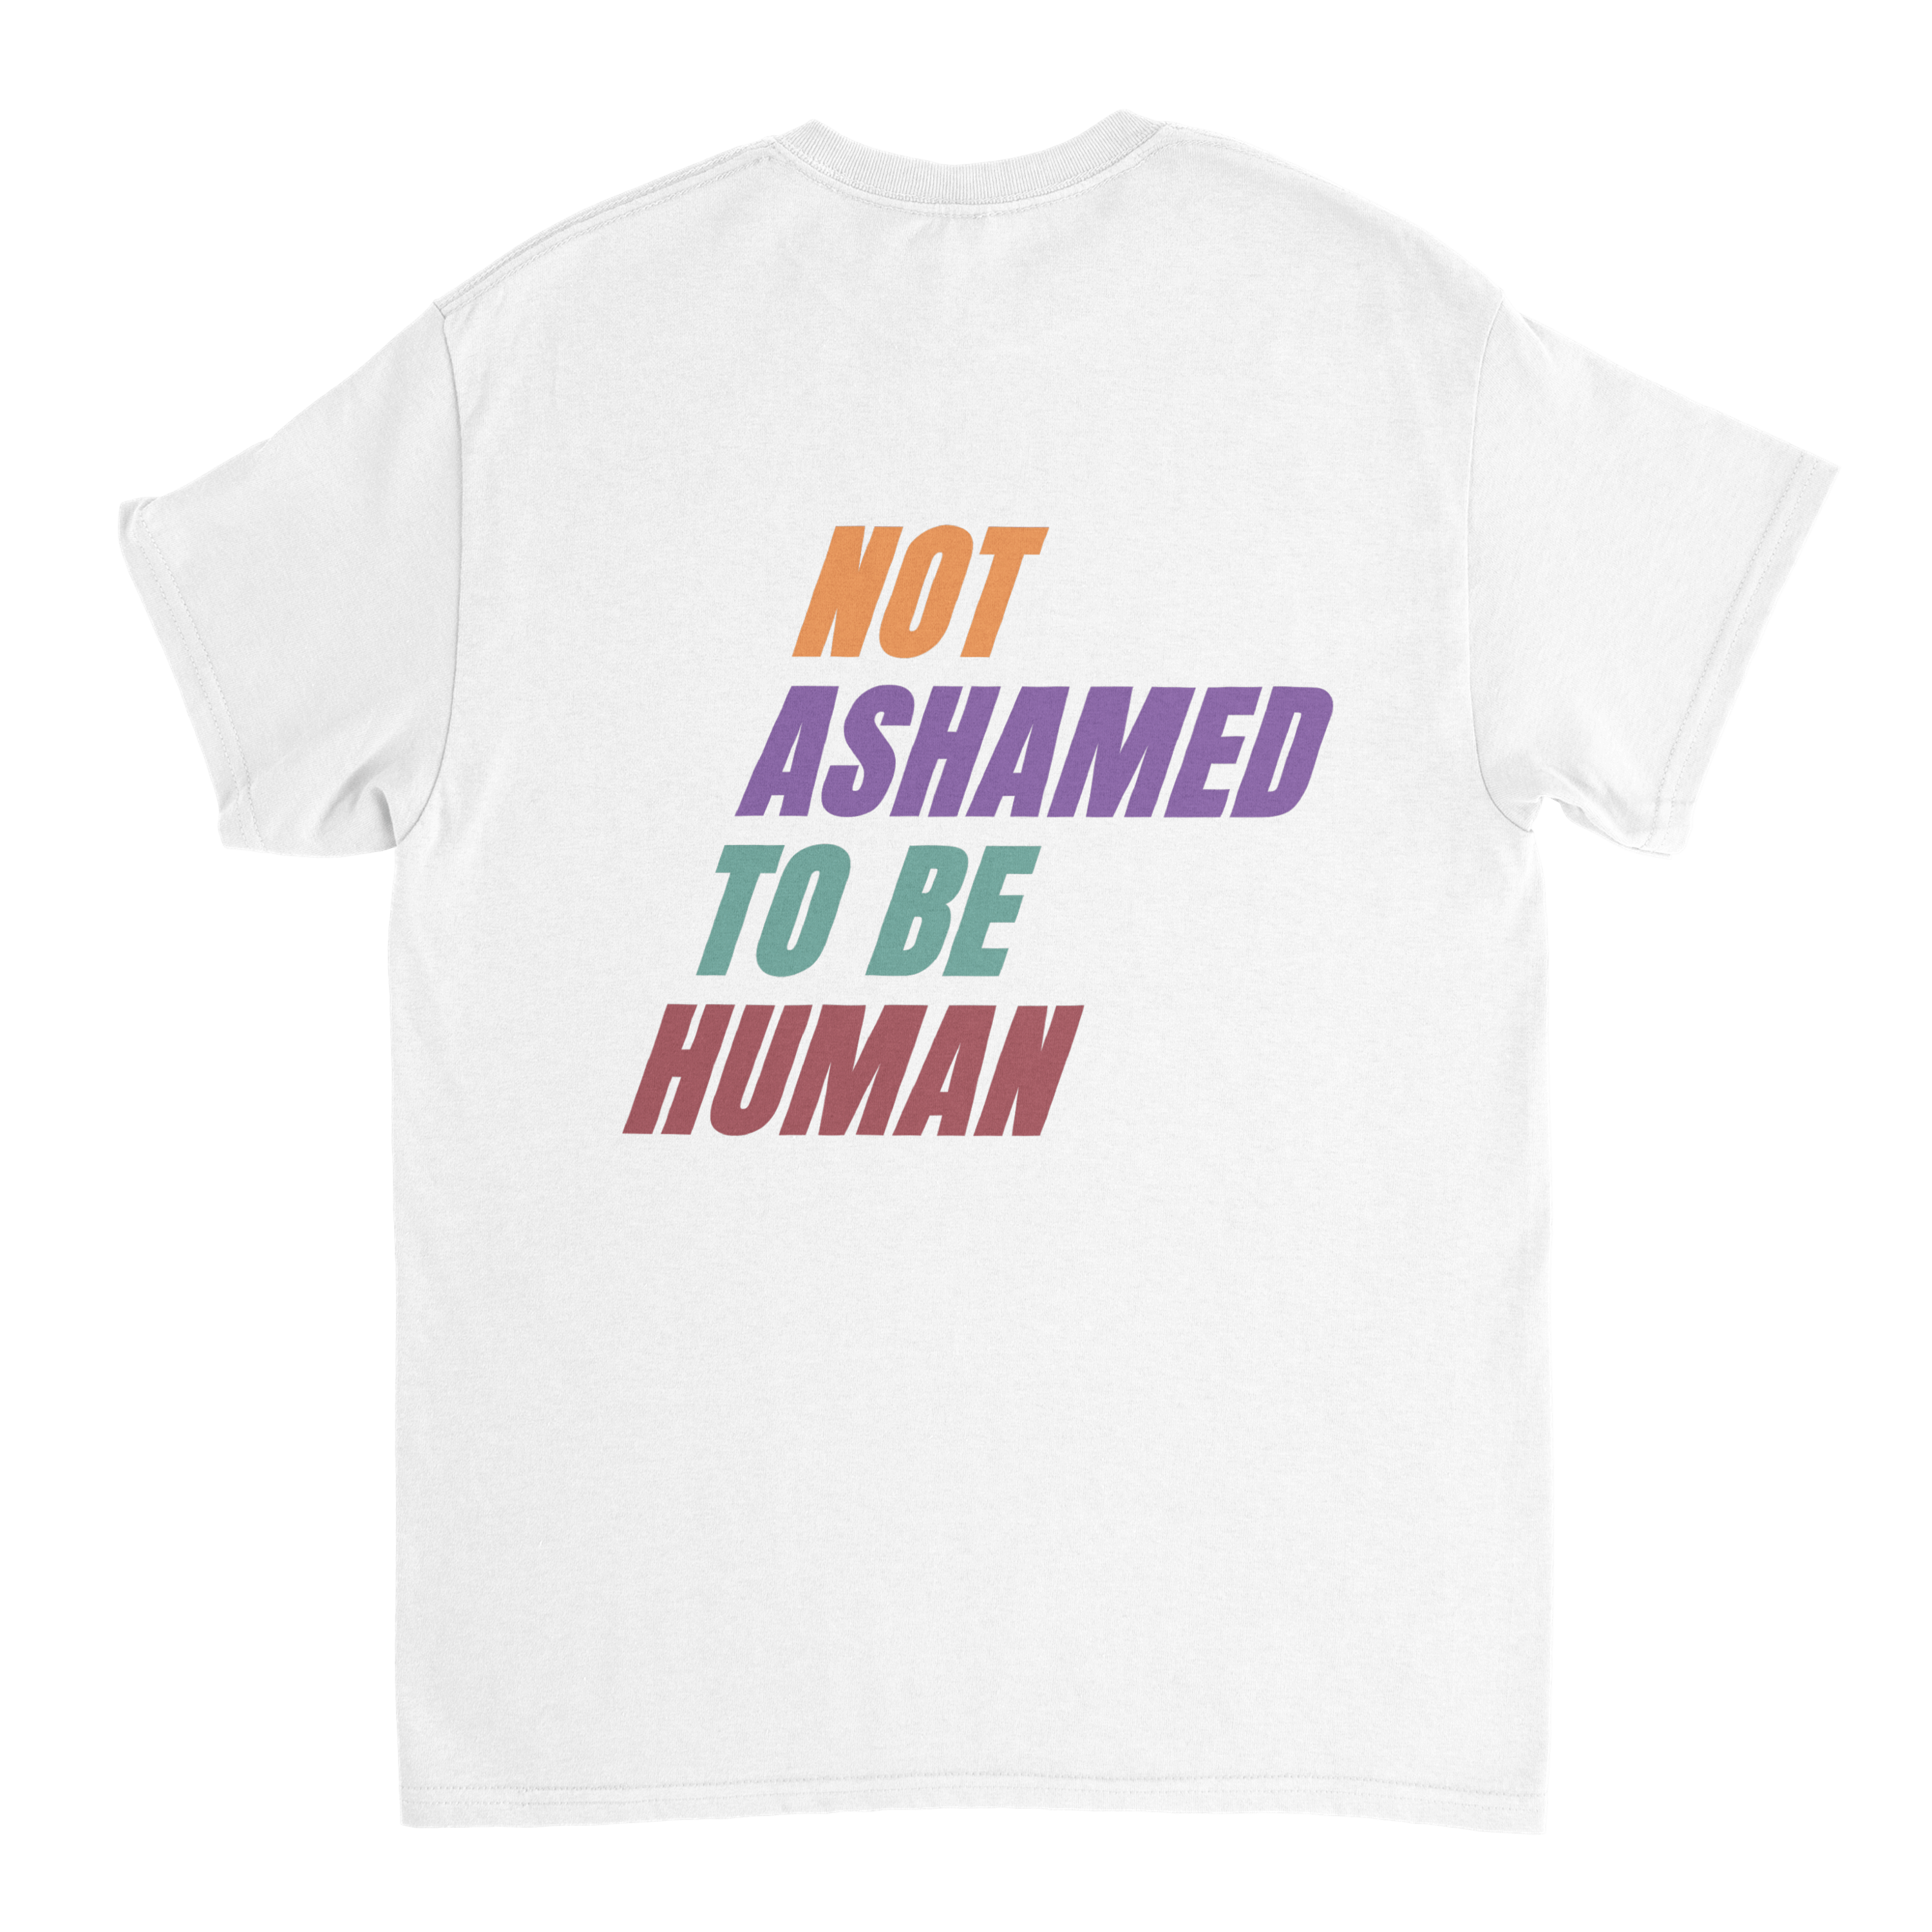 Not Ashamed To Be Human - Tee